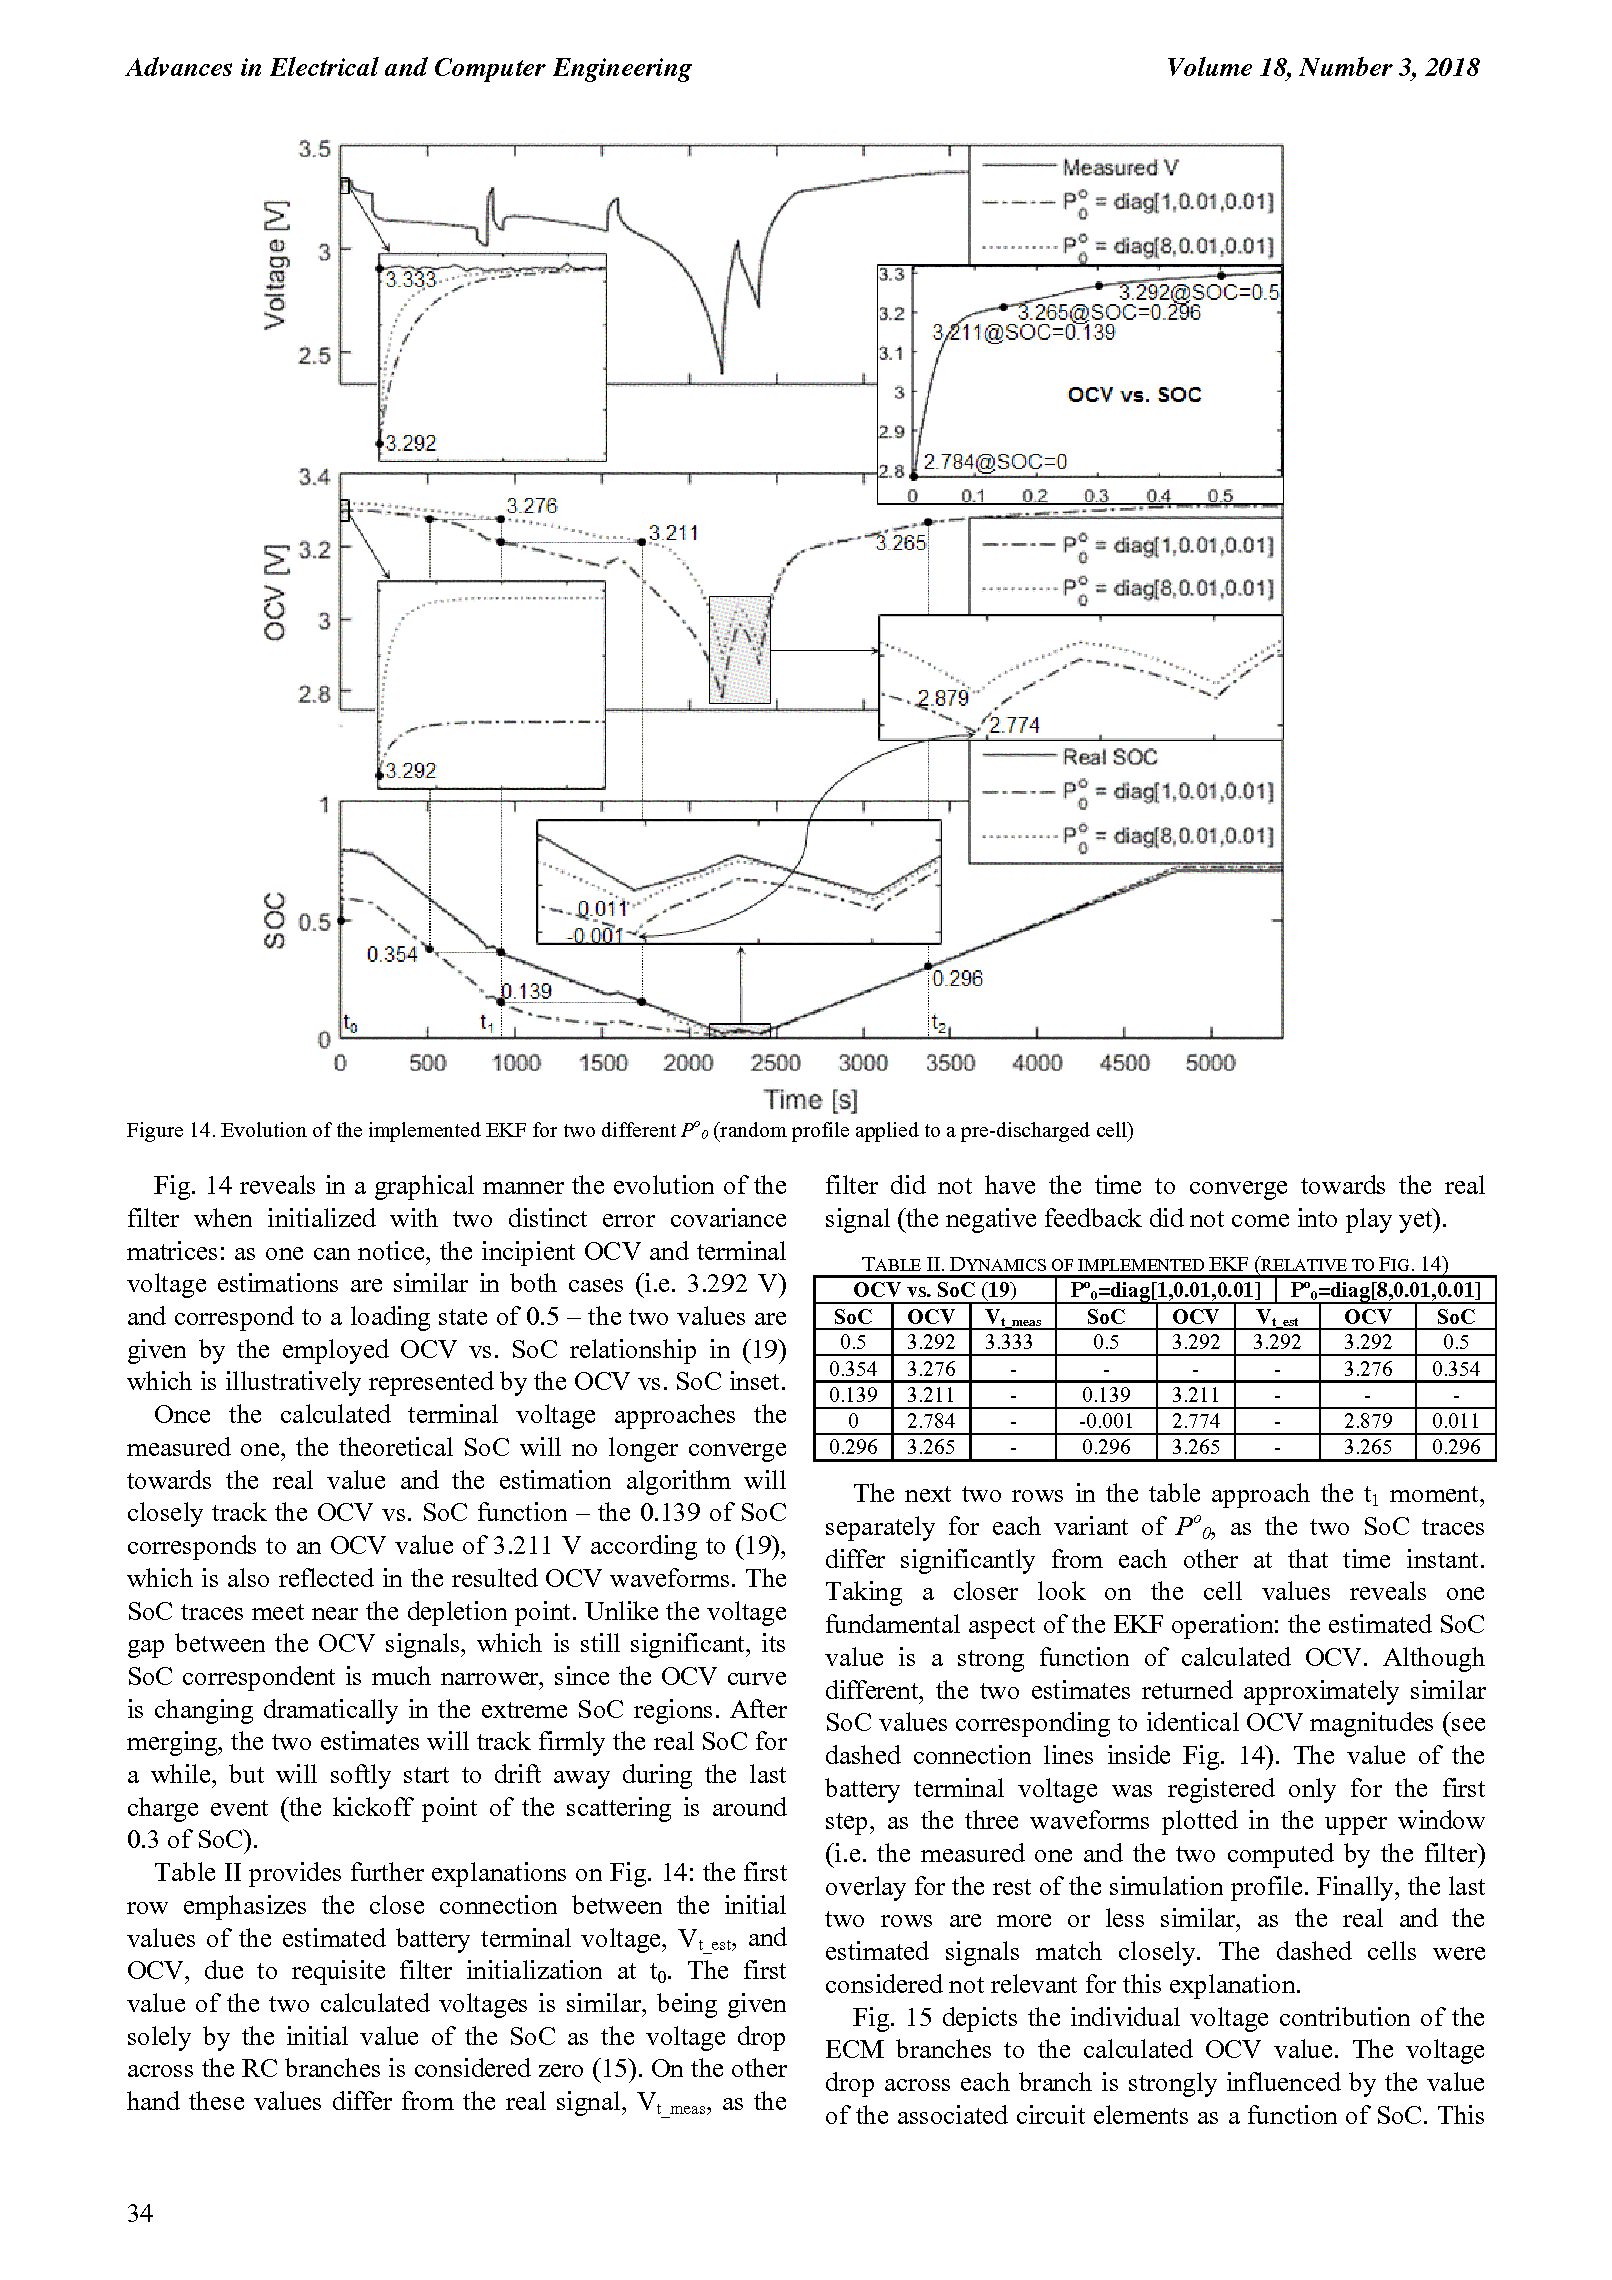 PDF Quickview for paper with DOI:10.4316/AECE.2018.03005